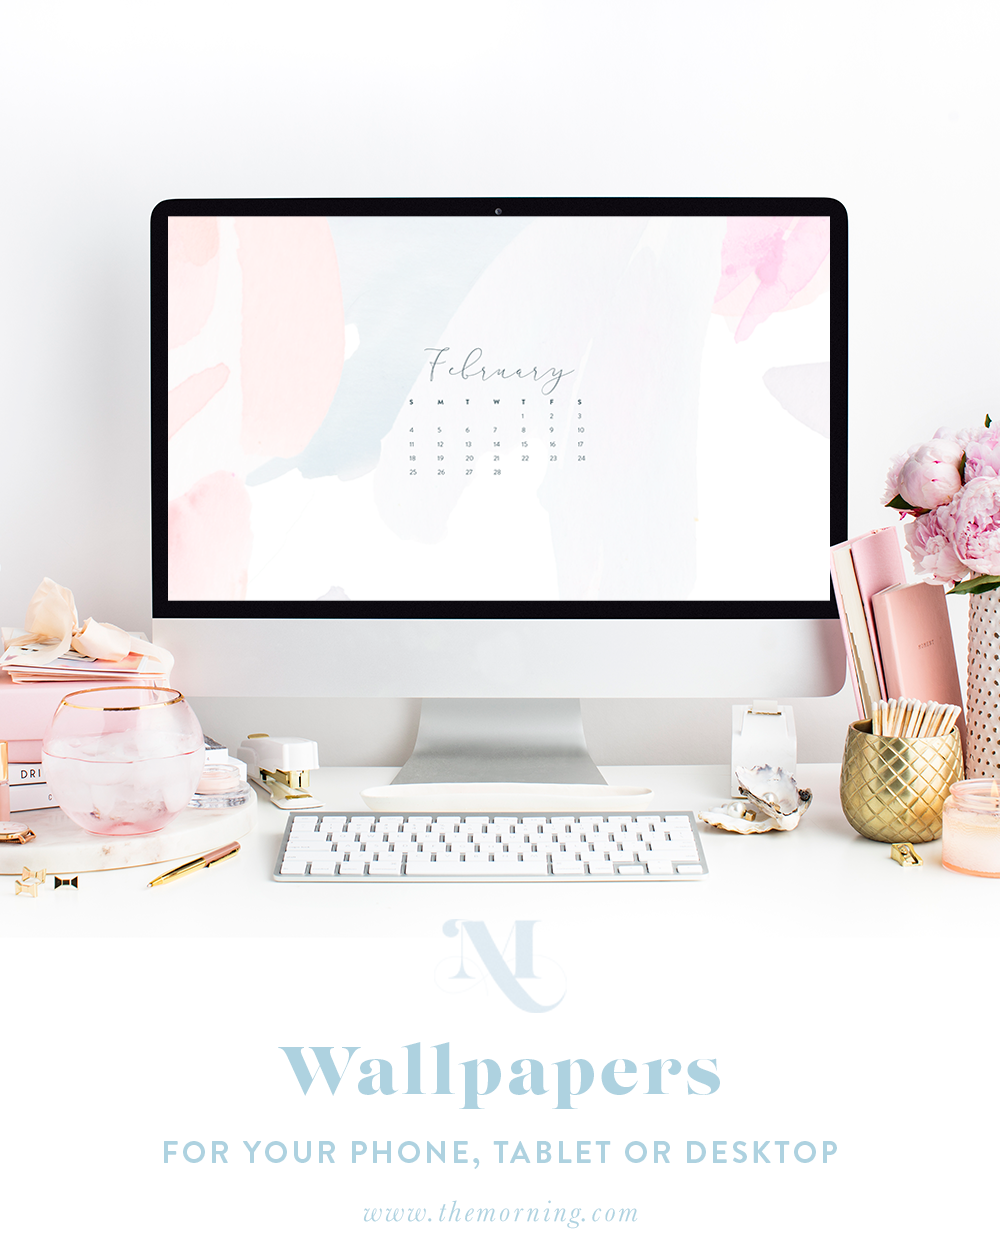 "His love never ends." Lamentations 3:21 | Free Wallpapers | The Morning | A Community of hope for women finding joy after infant loss and miscarriage. | Ashlee Proffitt | The Morning | Miscarriage, Stillbirth, Infant Loss